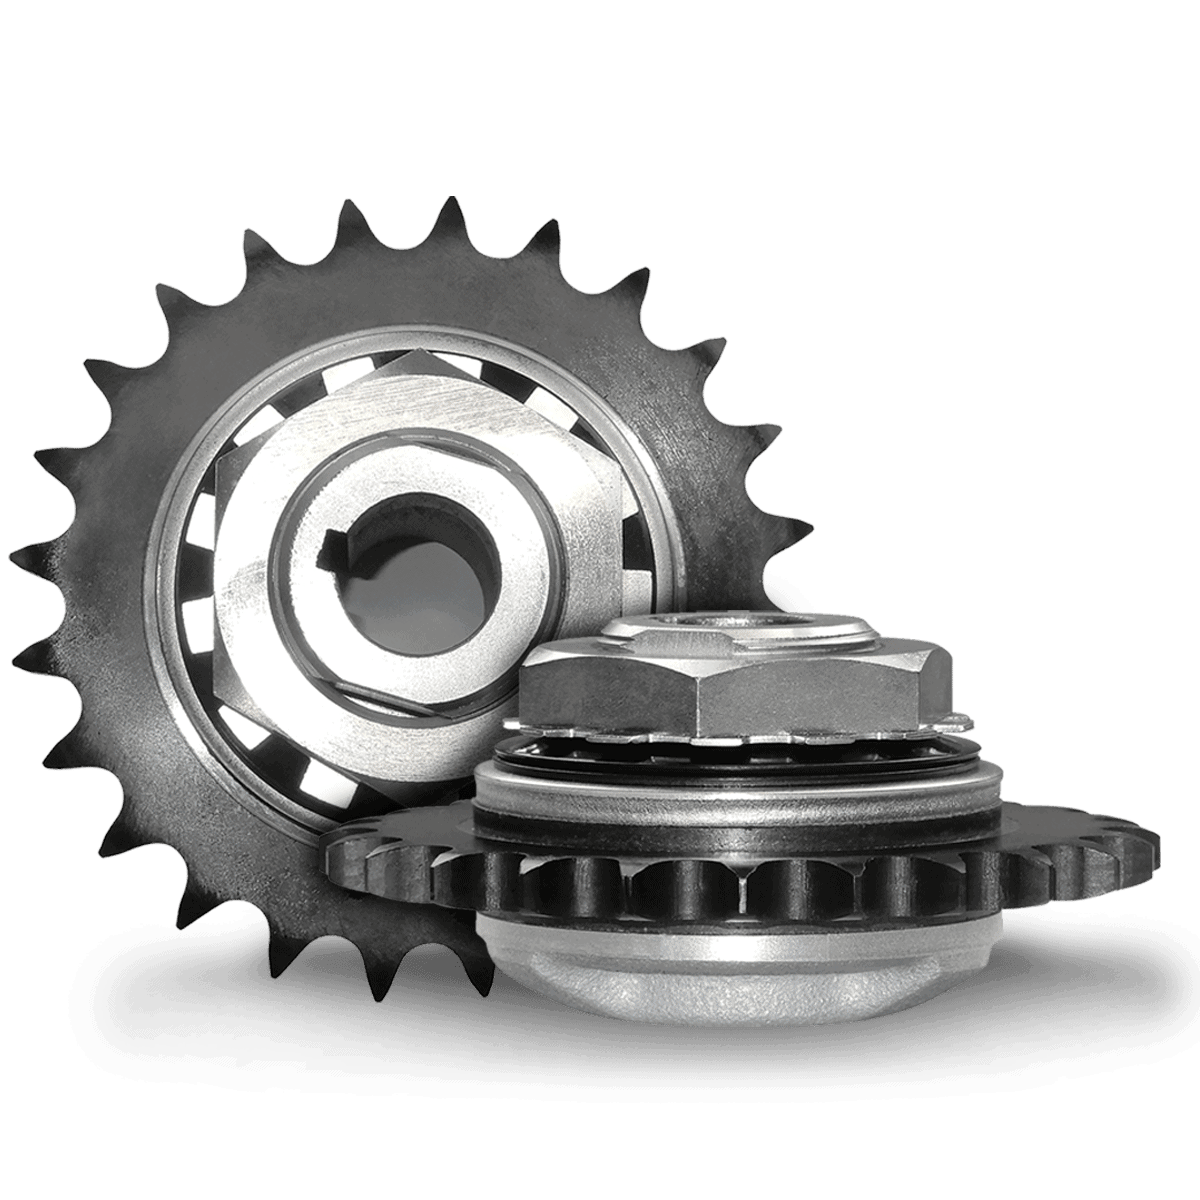 Torque Limiter Sprockets Offer Maximum Protection from Overload